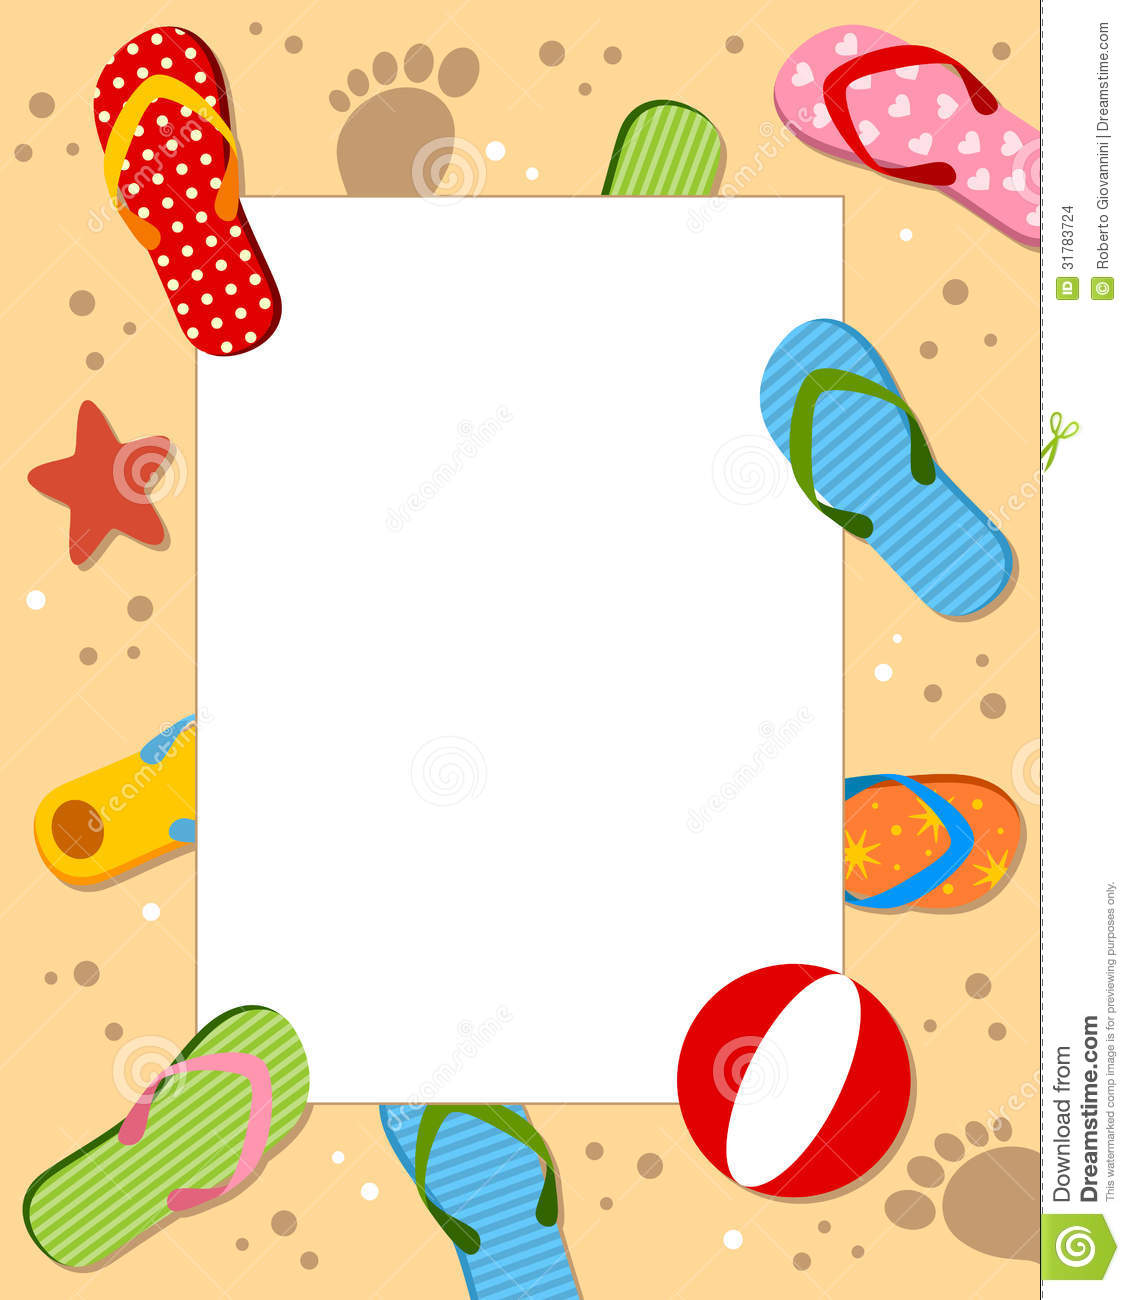 Beach With Colorful Flip Flops Or Beach Sandals  Eps File Available